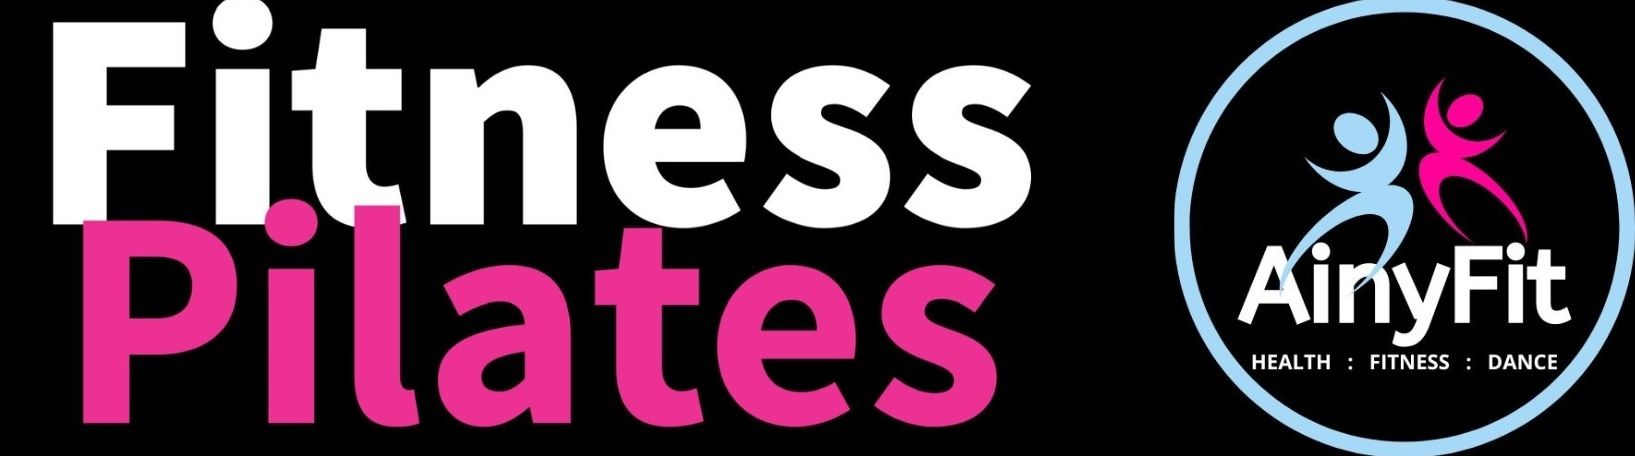 Fitness Pilates classes by Alison Fry of AinyFit Ltd